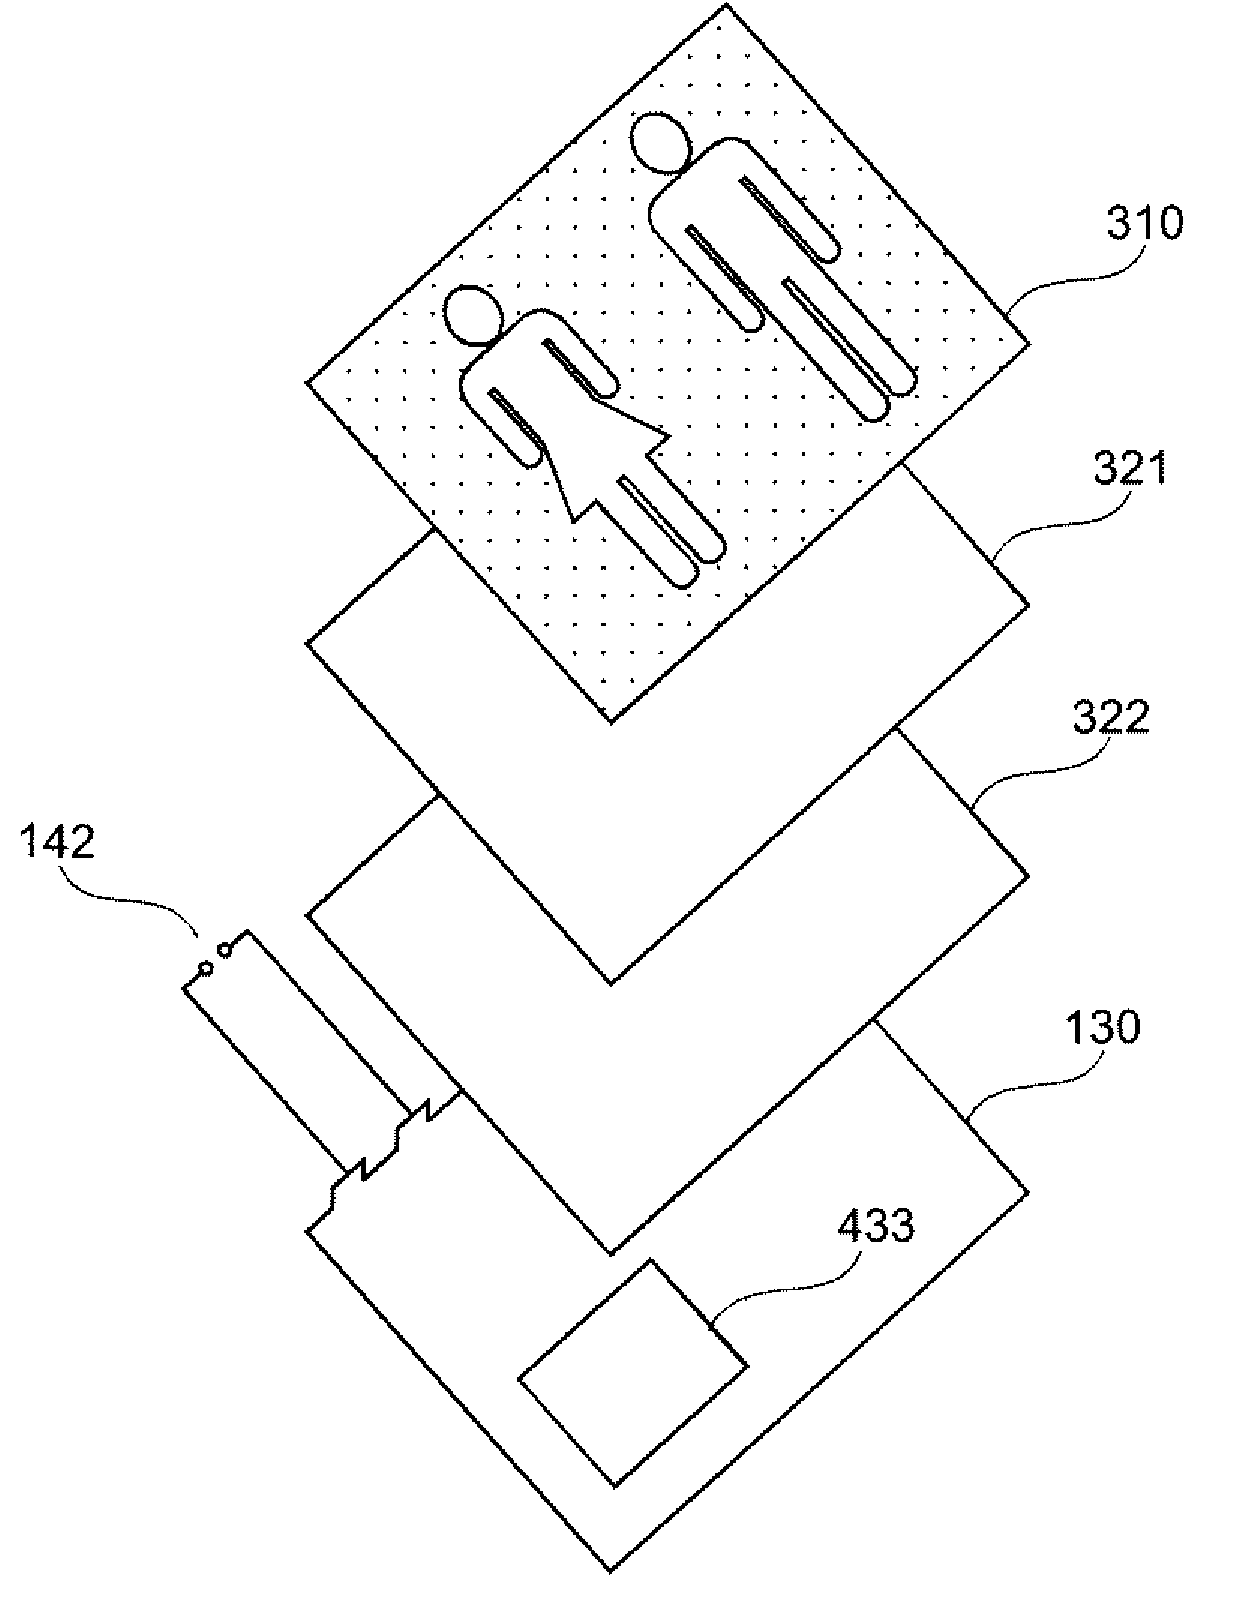 Flat illumination device for illumination and backlighting with integrated emergency power supply